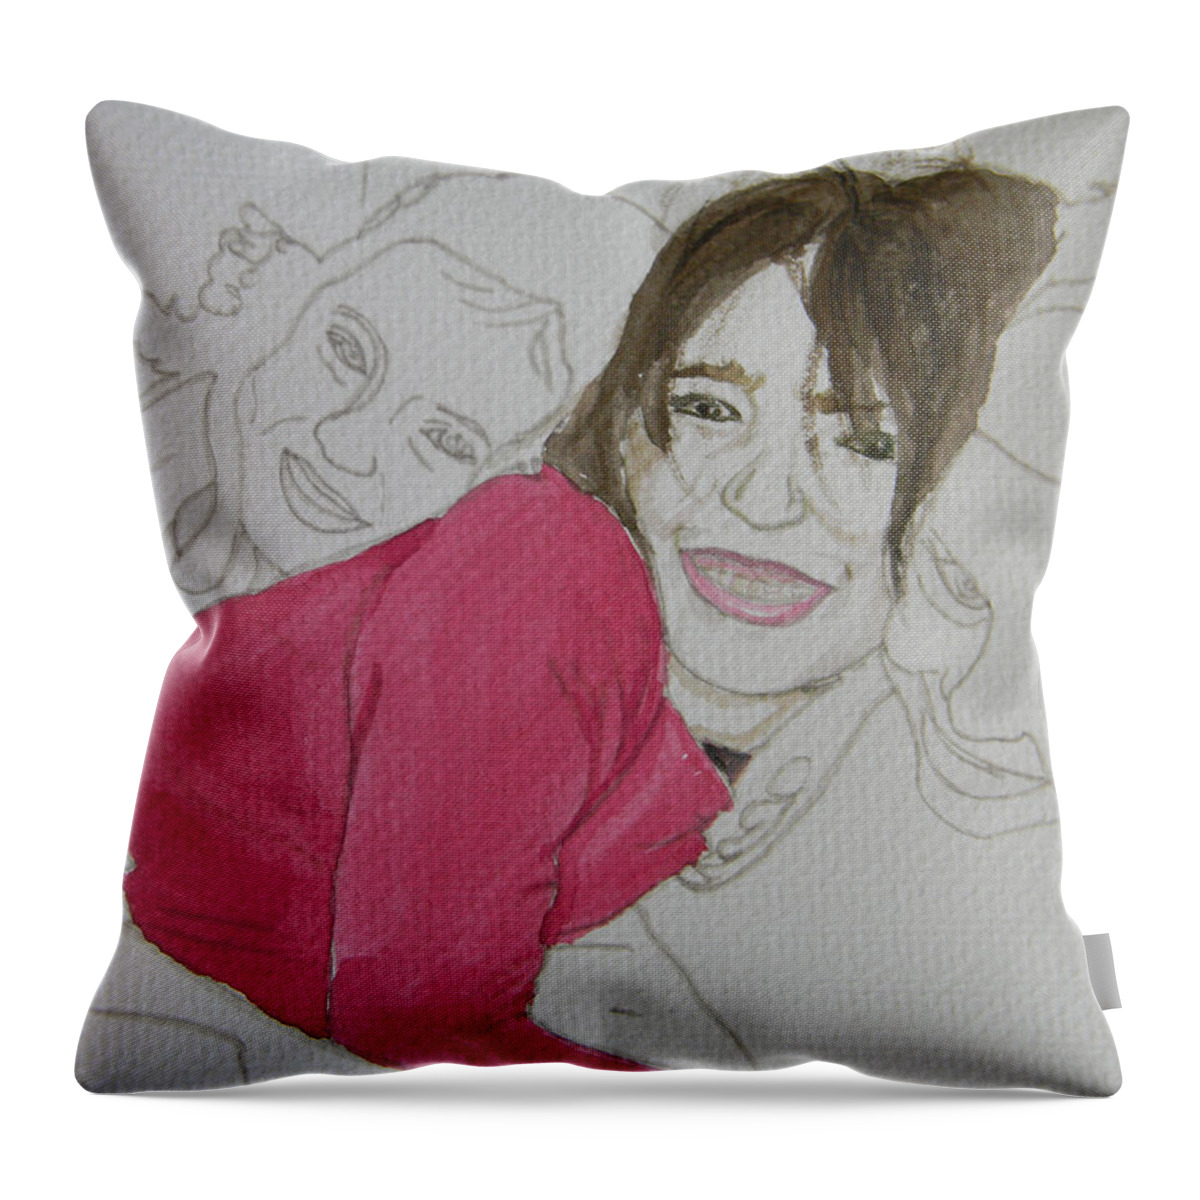 Girls Throw Pillow featuring the painting Cousins Portrait 2 of 3 by Marwan George Khoury